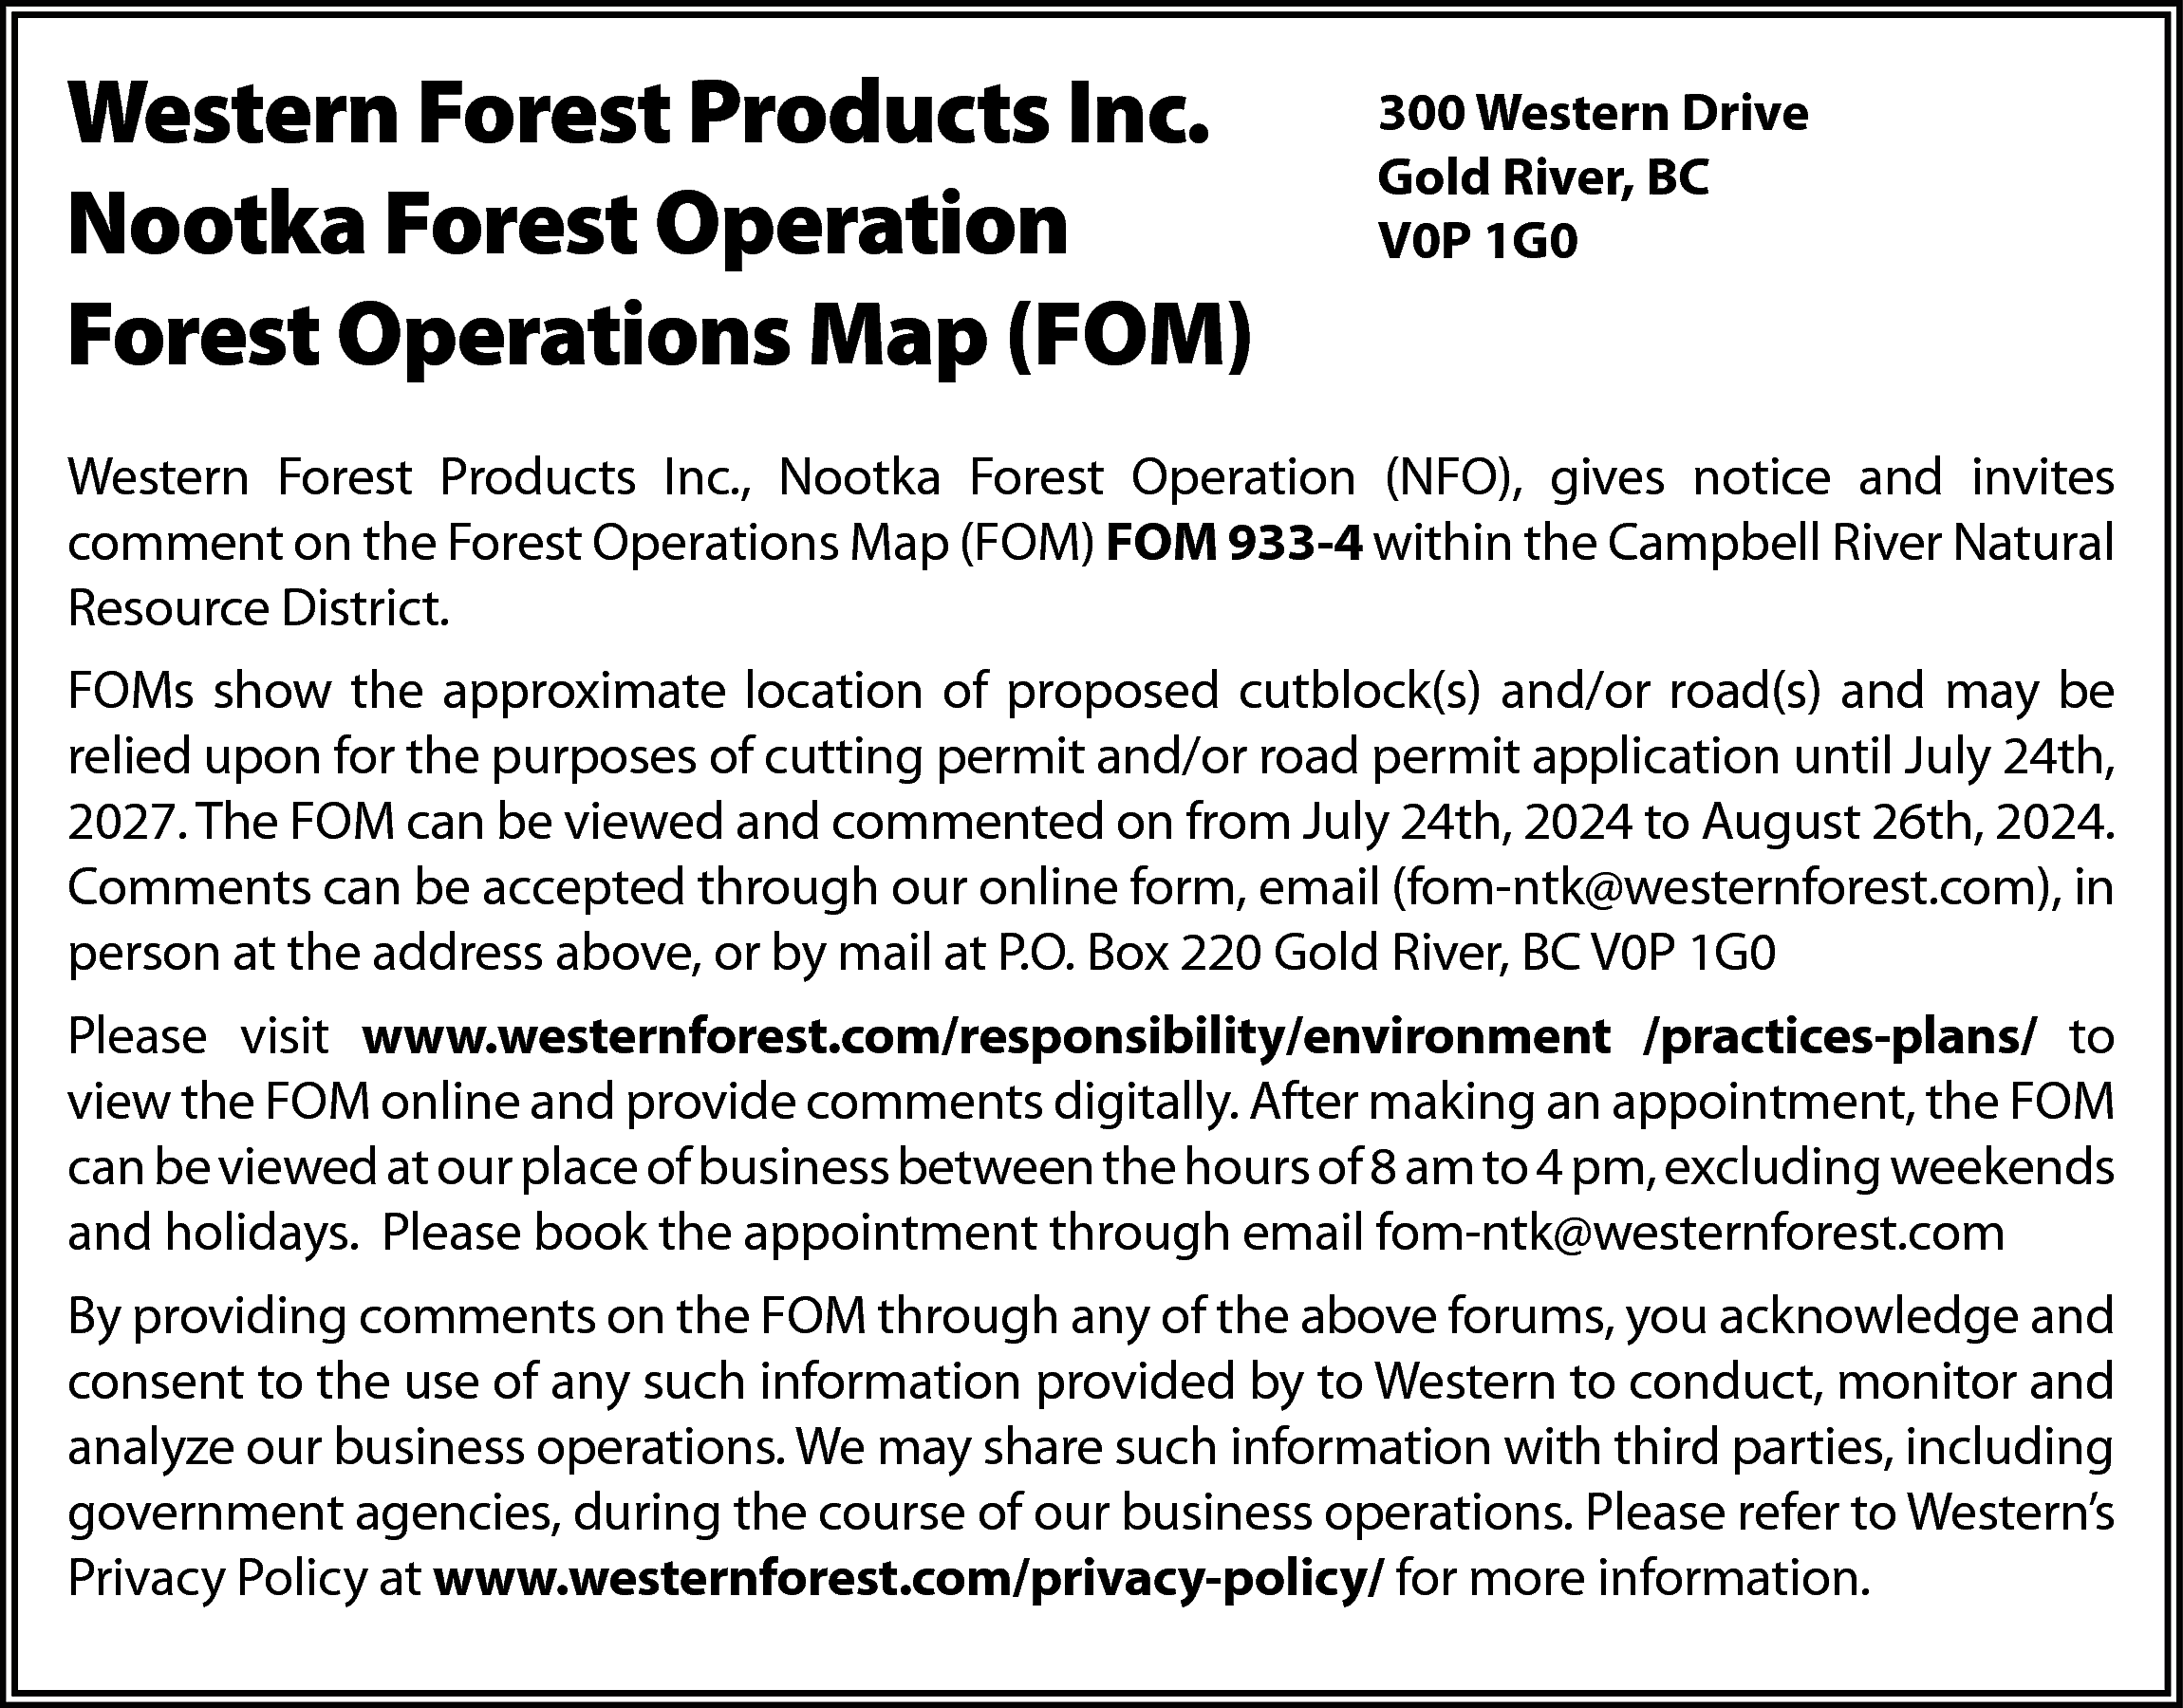 Western Forest Products Inc. <br>Nootka  Western Forest Products Inc.  Nootka Forest Operation  Forest Operations Map (FOM)    300 Western Drive  Gold River, BC  V0P 1G0    Western Forest Products Inc., Nootka Forest Operation (NFO), gives notice and invites  comment on the Forest Operations Map (FOM) FOM 933-4 within the Campbell River Natural  Resource District.  FOMs show the approximate location of proposed cutblock(s) and/or road(s) and may be  relied upon for the purposes of cutting permit and/or road permit application until July 24th,  2027. The FOM can be viewed and commented on from July 24th, 2024 to August 26th, 2024.  Comments can be accepted through our online form, email (fom-ntk@westernforest.com), in  person at the address above, or by mail at P.O. Box 220 Gold River, BC V0P 1G0  Please visit www.westernforest.com/responsibility/environment /practices-plans/ to  view the FOM online and provide comments digitally. After making an appointment, the FOM  can be viewed at our place of business between the hours of 8 am to 4 pm, excluding weekends  and holidays. Please book the appointment through email fom-ntk@westernforest.com  By providing comments on the FOM through any of the above forums, you acknowledge and  consent to the use of any such information provided by to Western to conduct, monitor and  analyze our business operations. We may share such information with third parties, including  government agencies, during the course of our business operations. Please refer to Western’s  Privacy Policy at www.westernforest.com/privacy-policy/ for more information.    